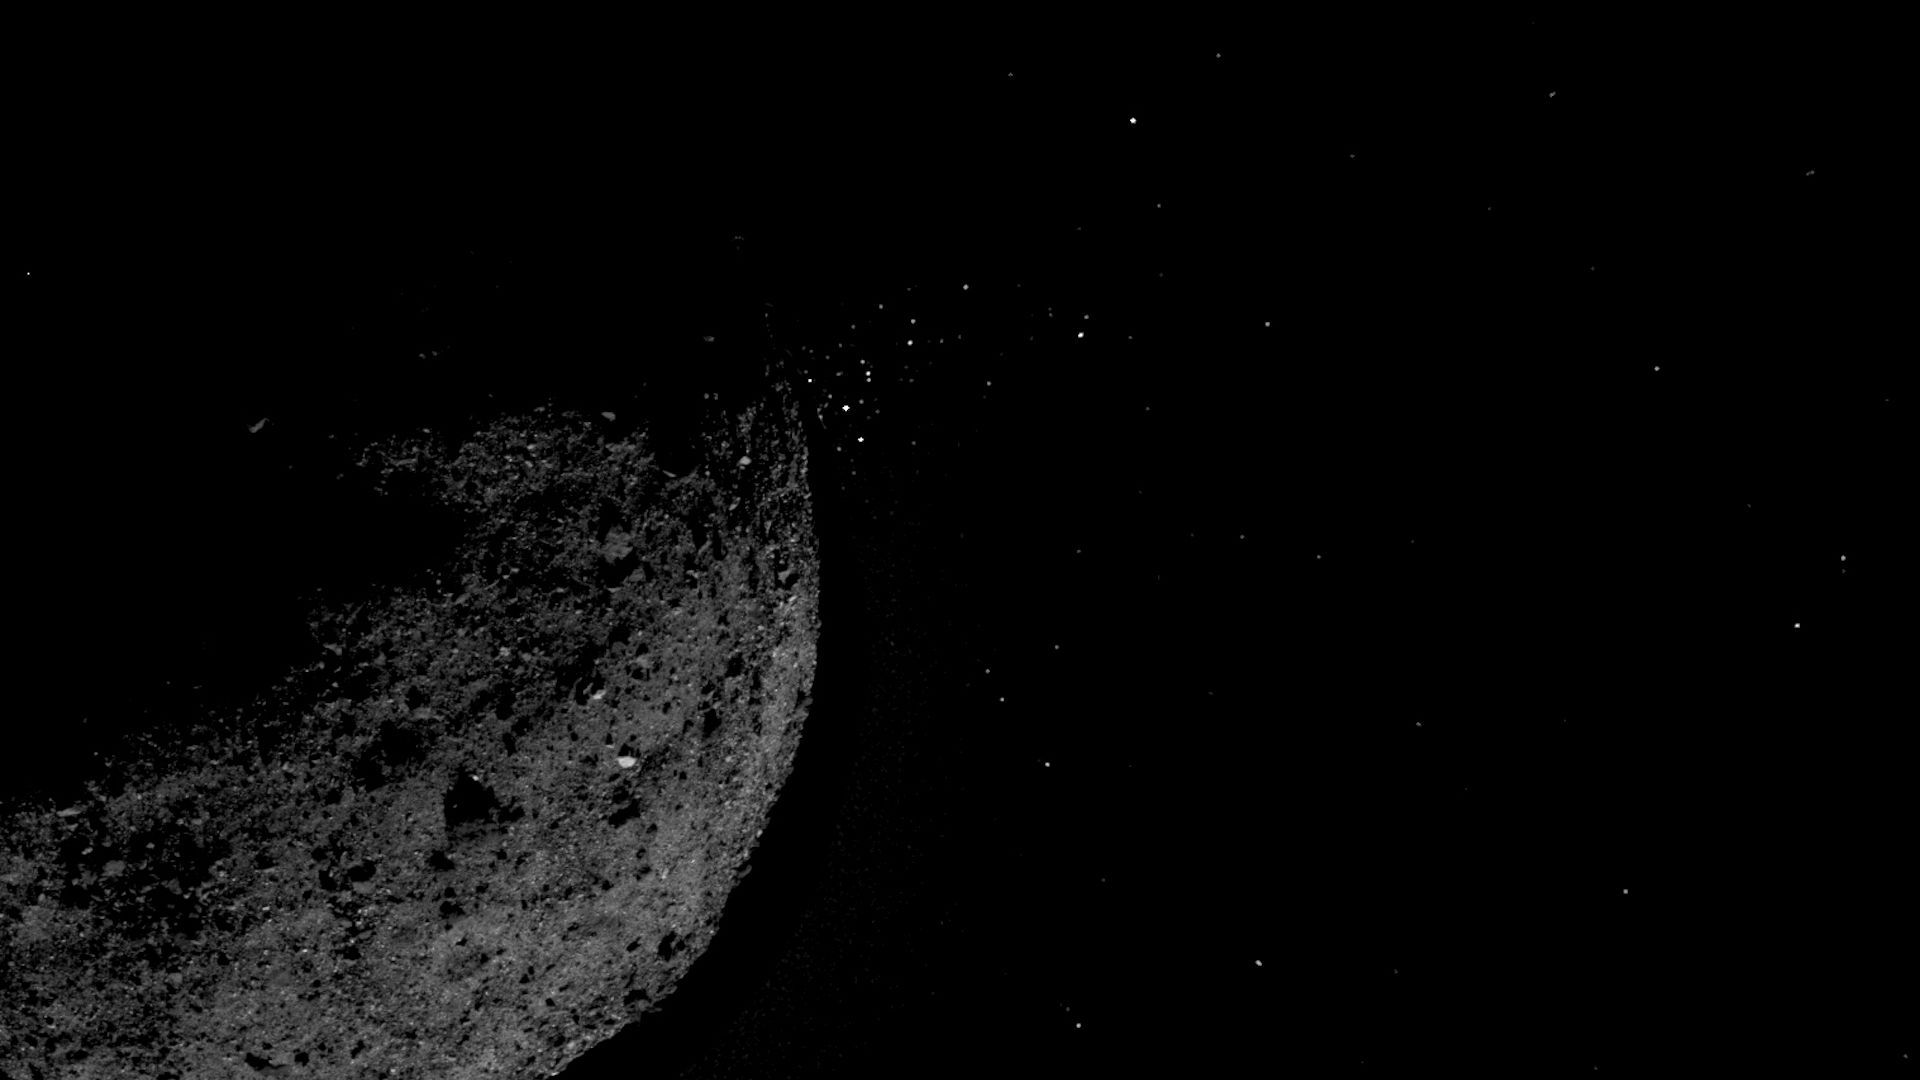 The asteroid Bennu projects particles from its surface.